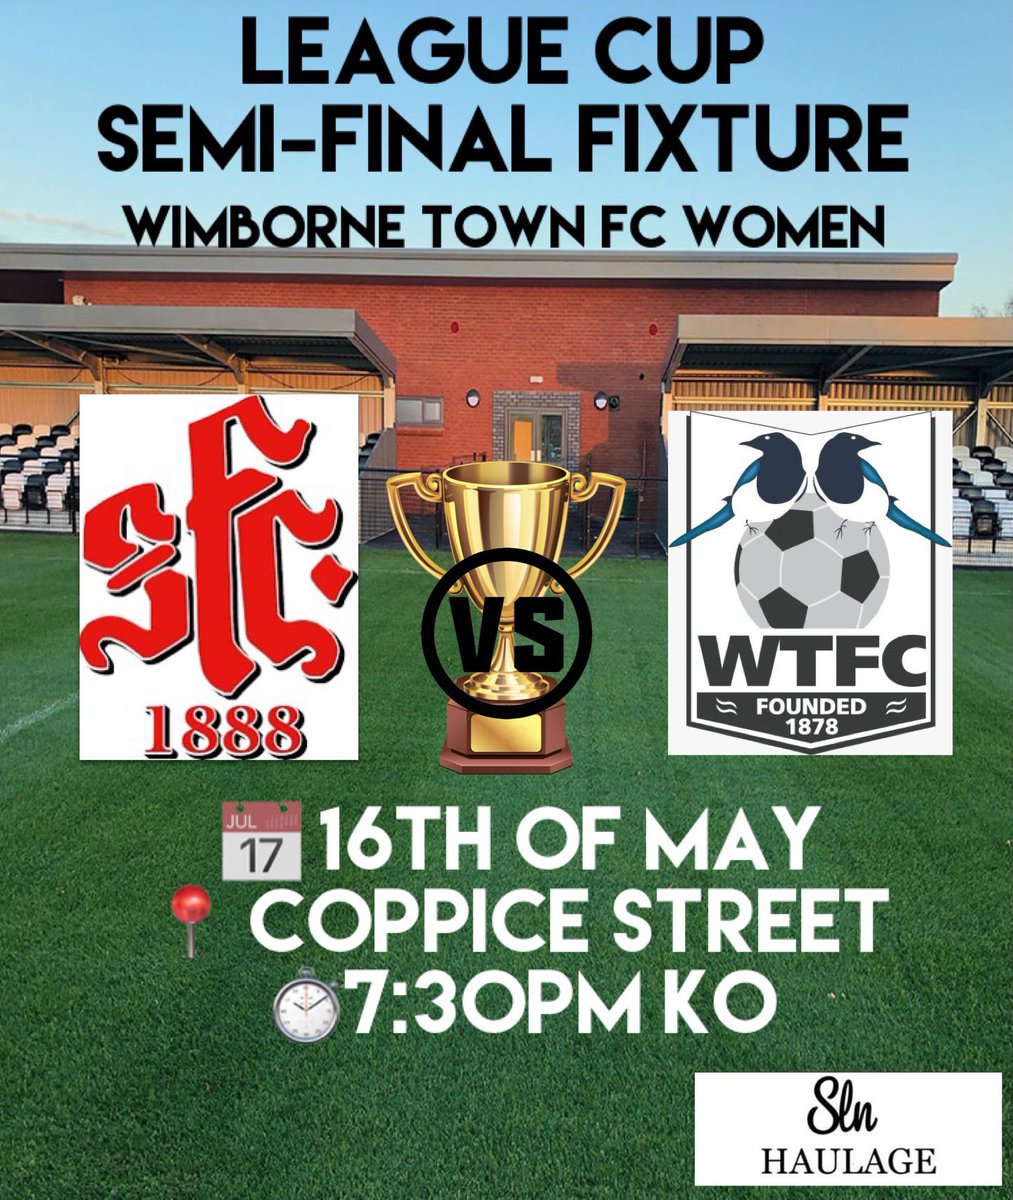 Following our Win on Sunday we are through to the next round of the League Cup 22/23. 

Come out and support the Magpies ⚫️⚪️⚫️